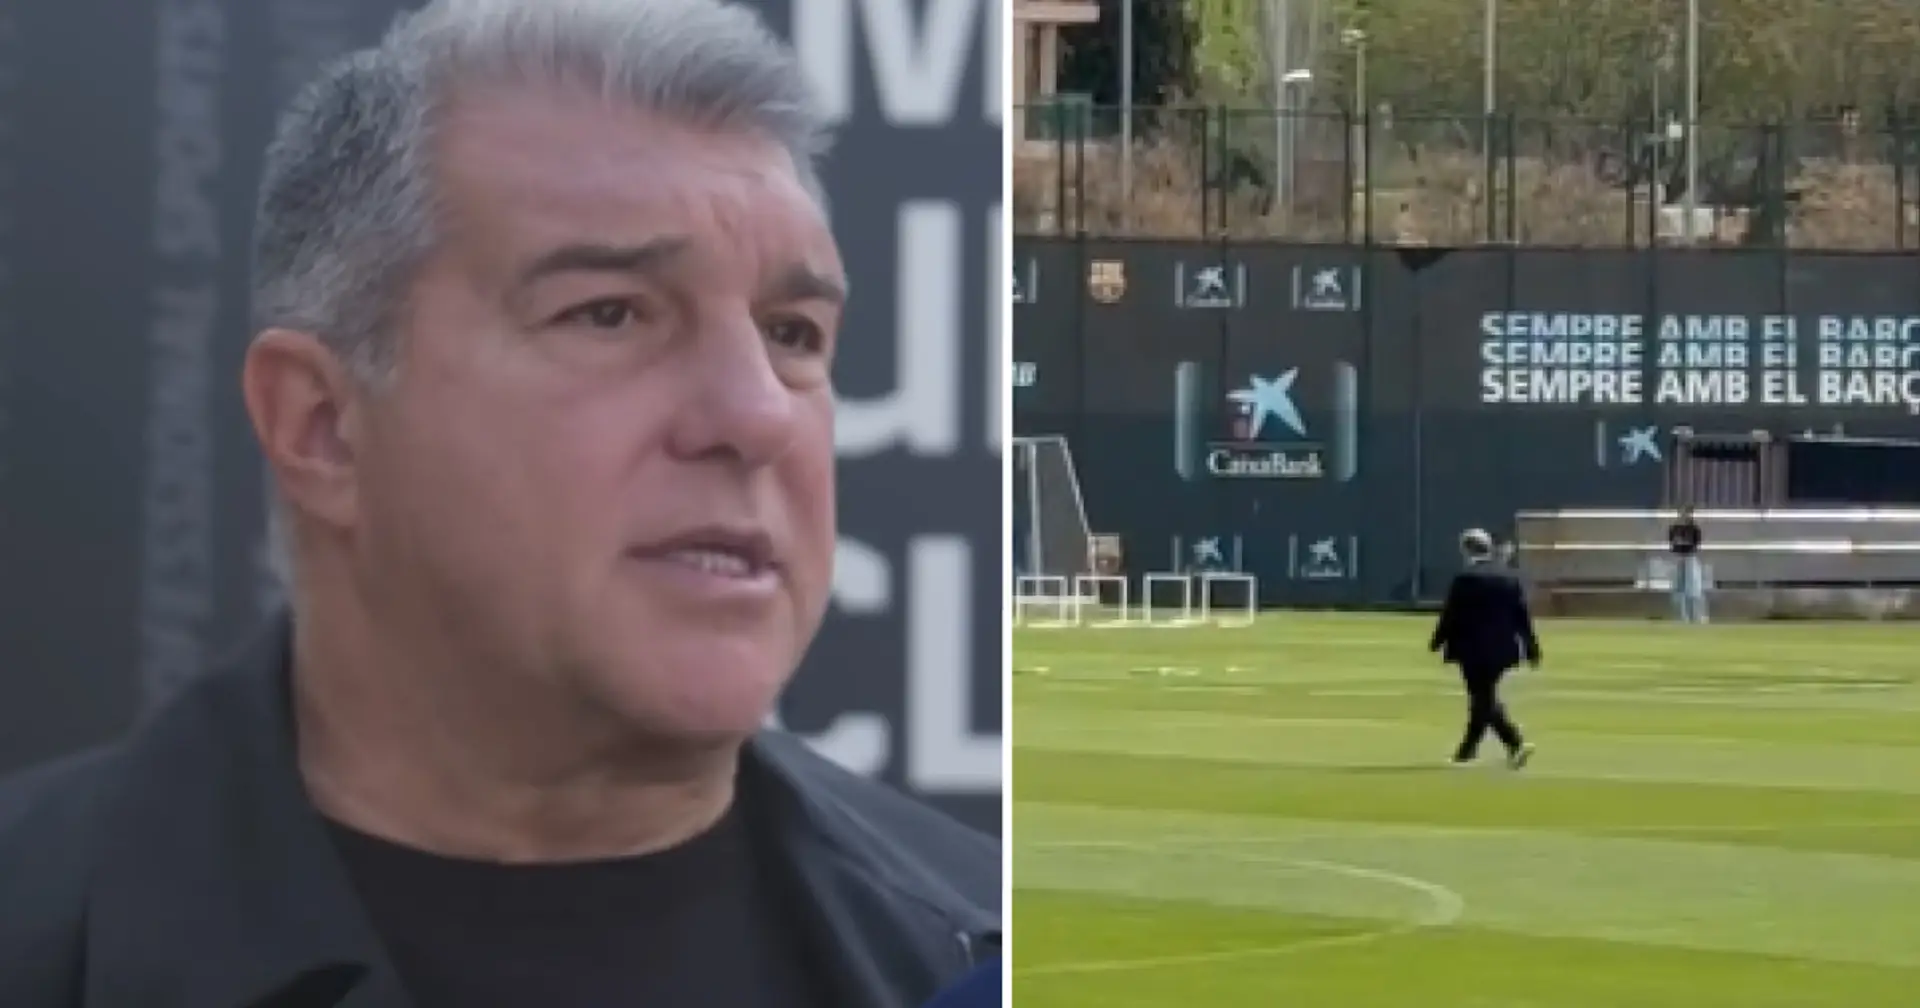 Caught on camera: Barca president storms team training – heads straight to hug one person